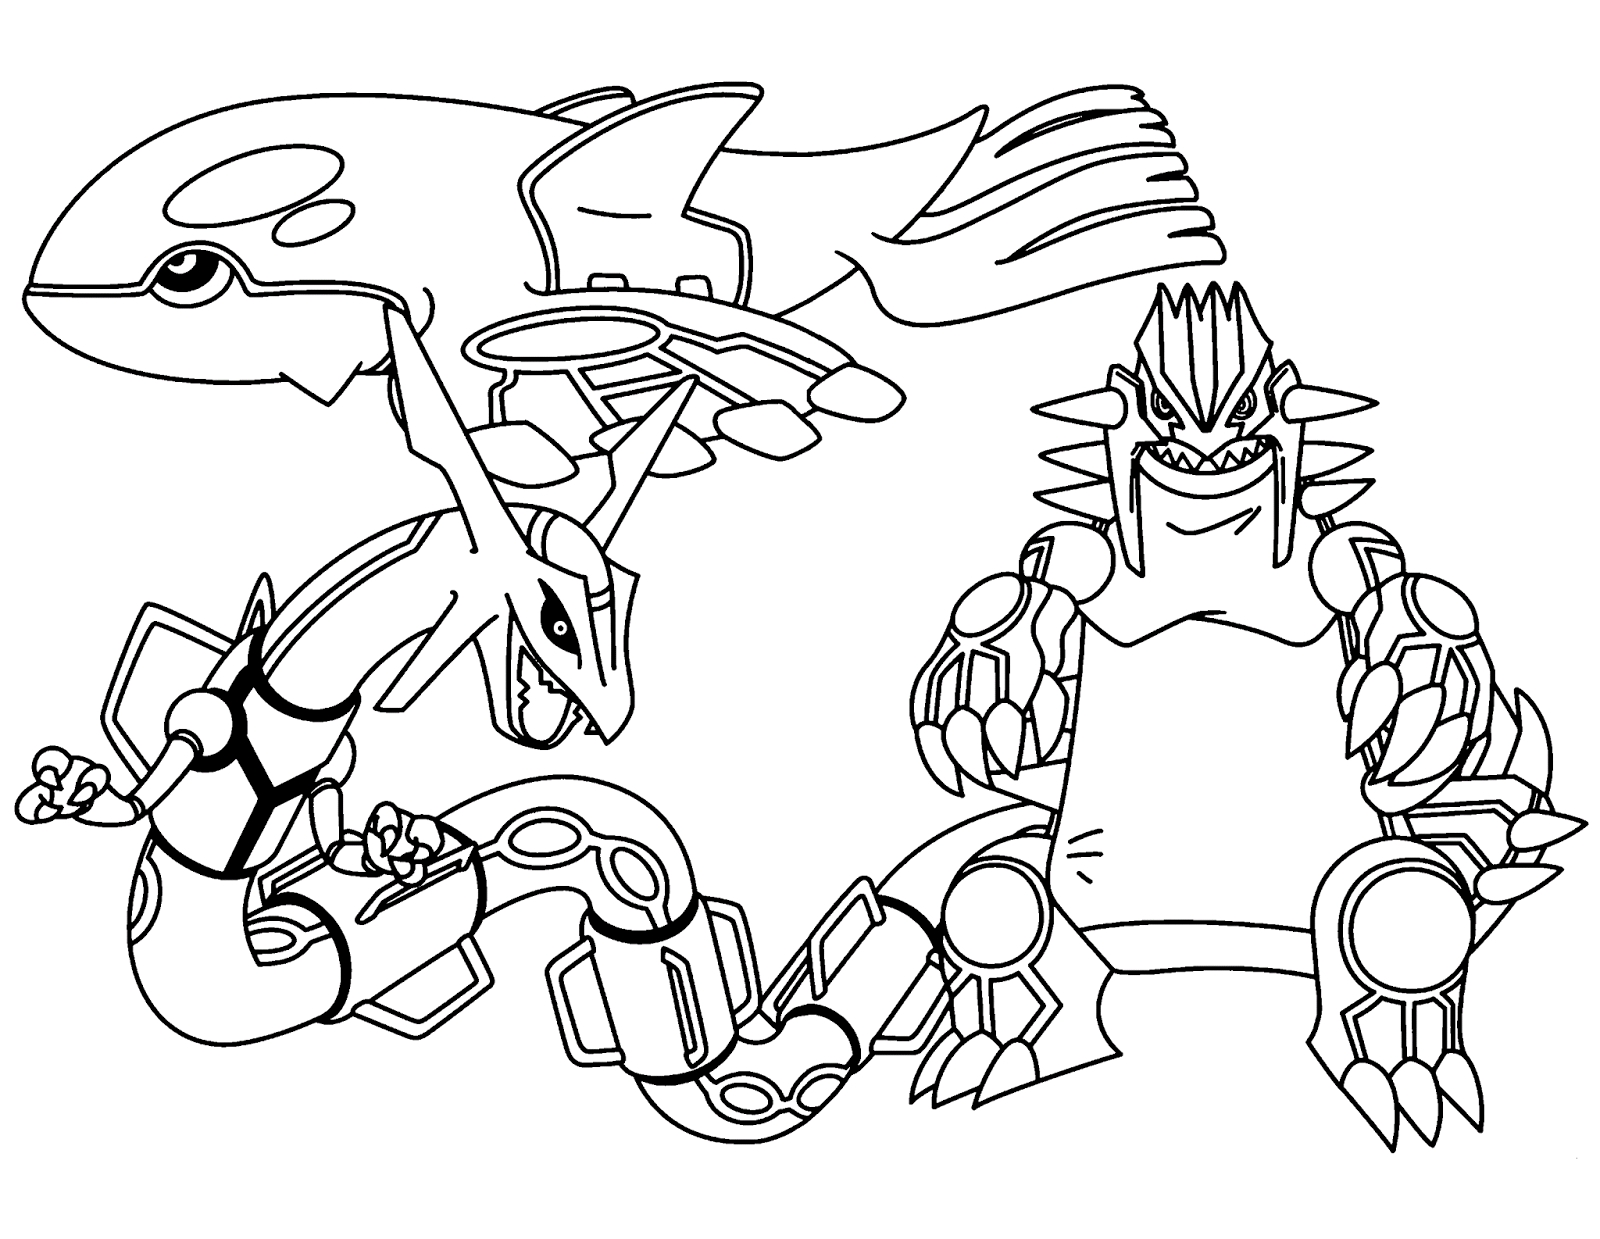 Legendary Pokemon Coloring Pages Printable at GetDrawings Free download